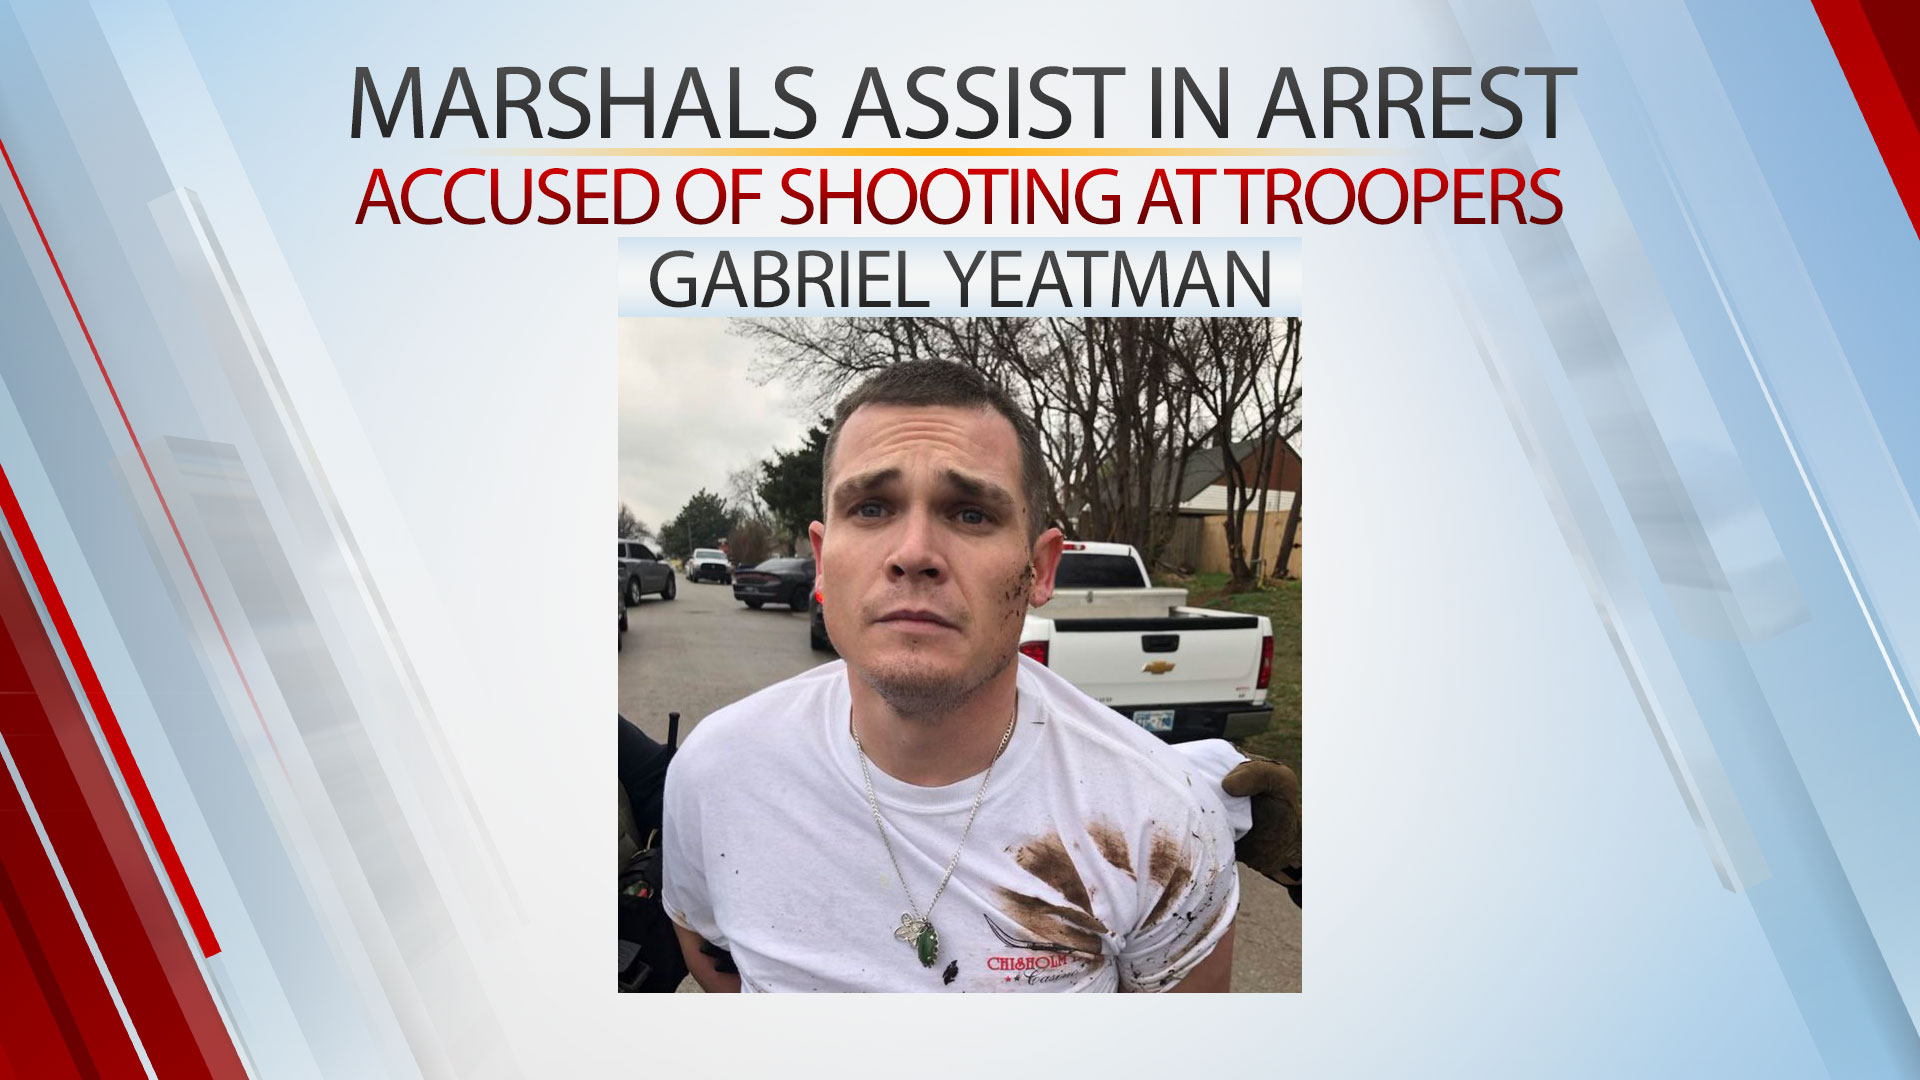 Man Accused Of Shooting At Trooper, Driving Wrong Way On I-240 Apprehended